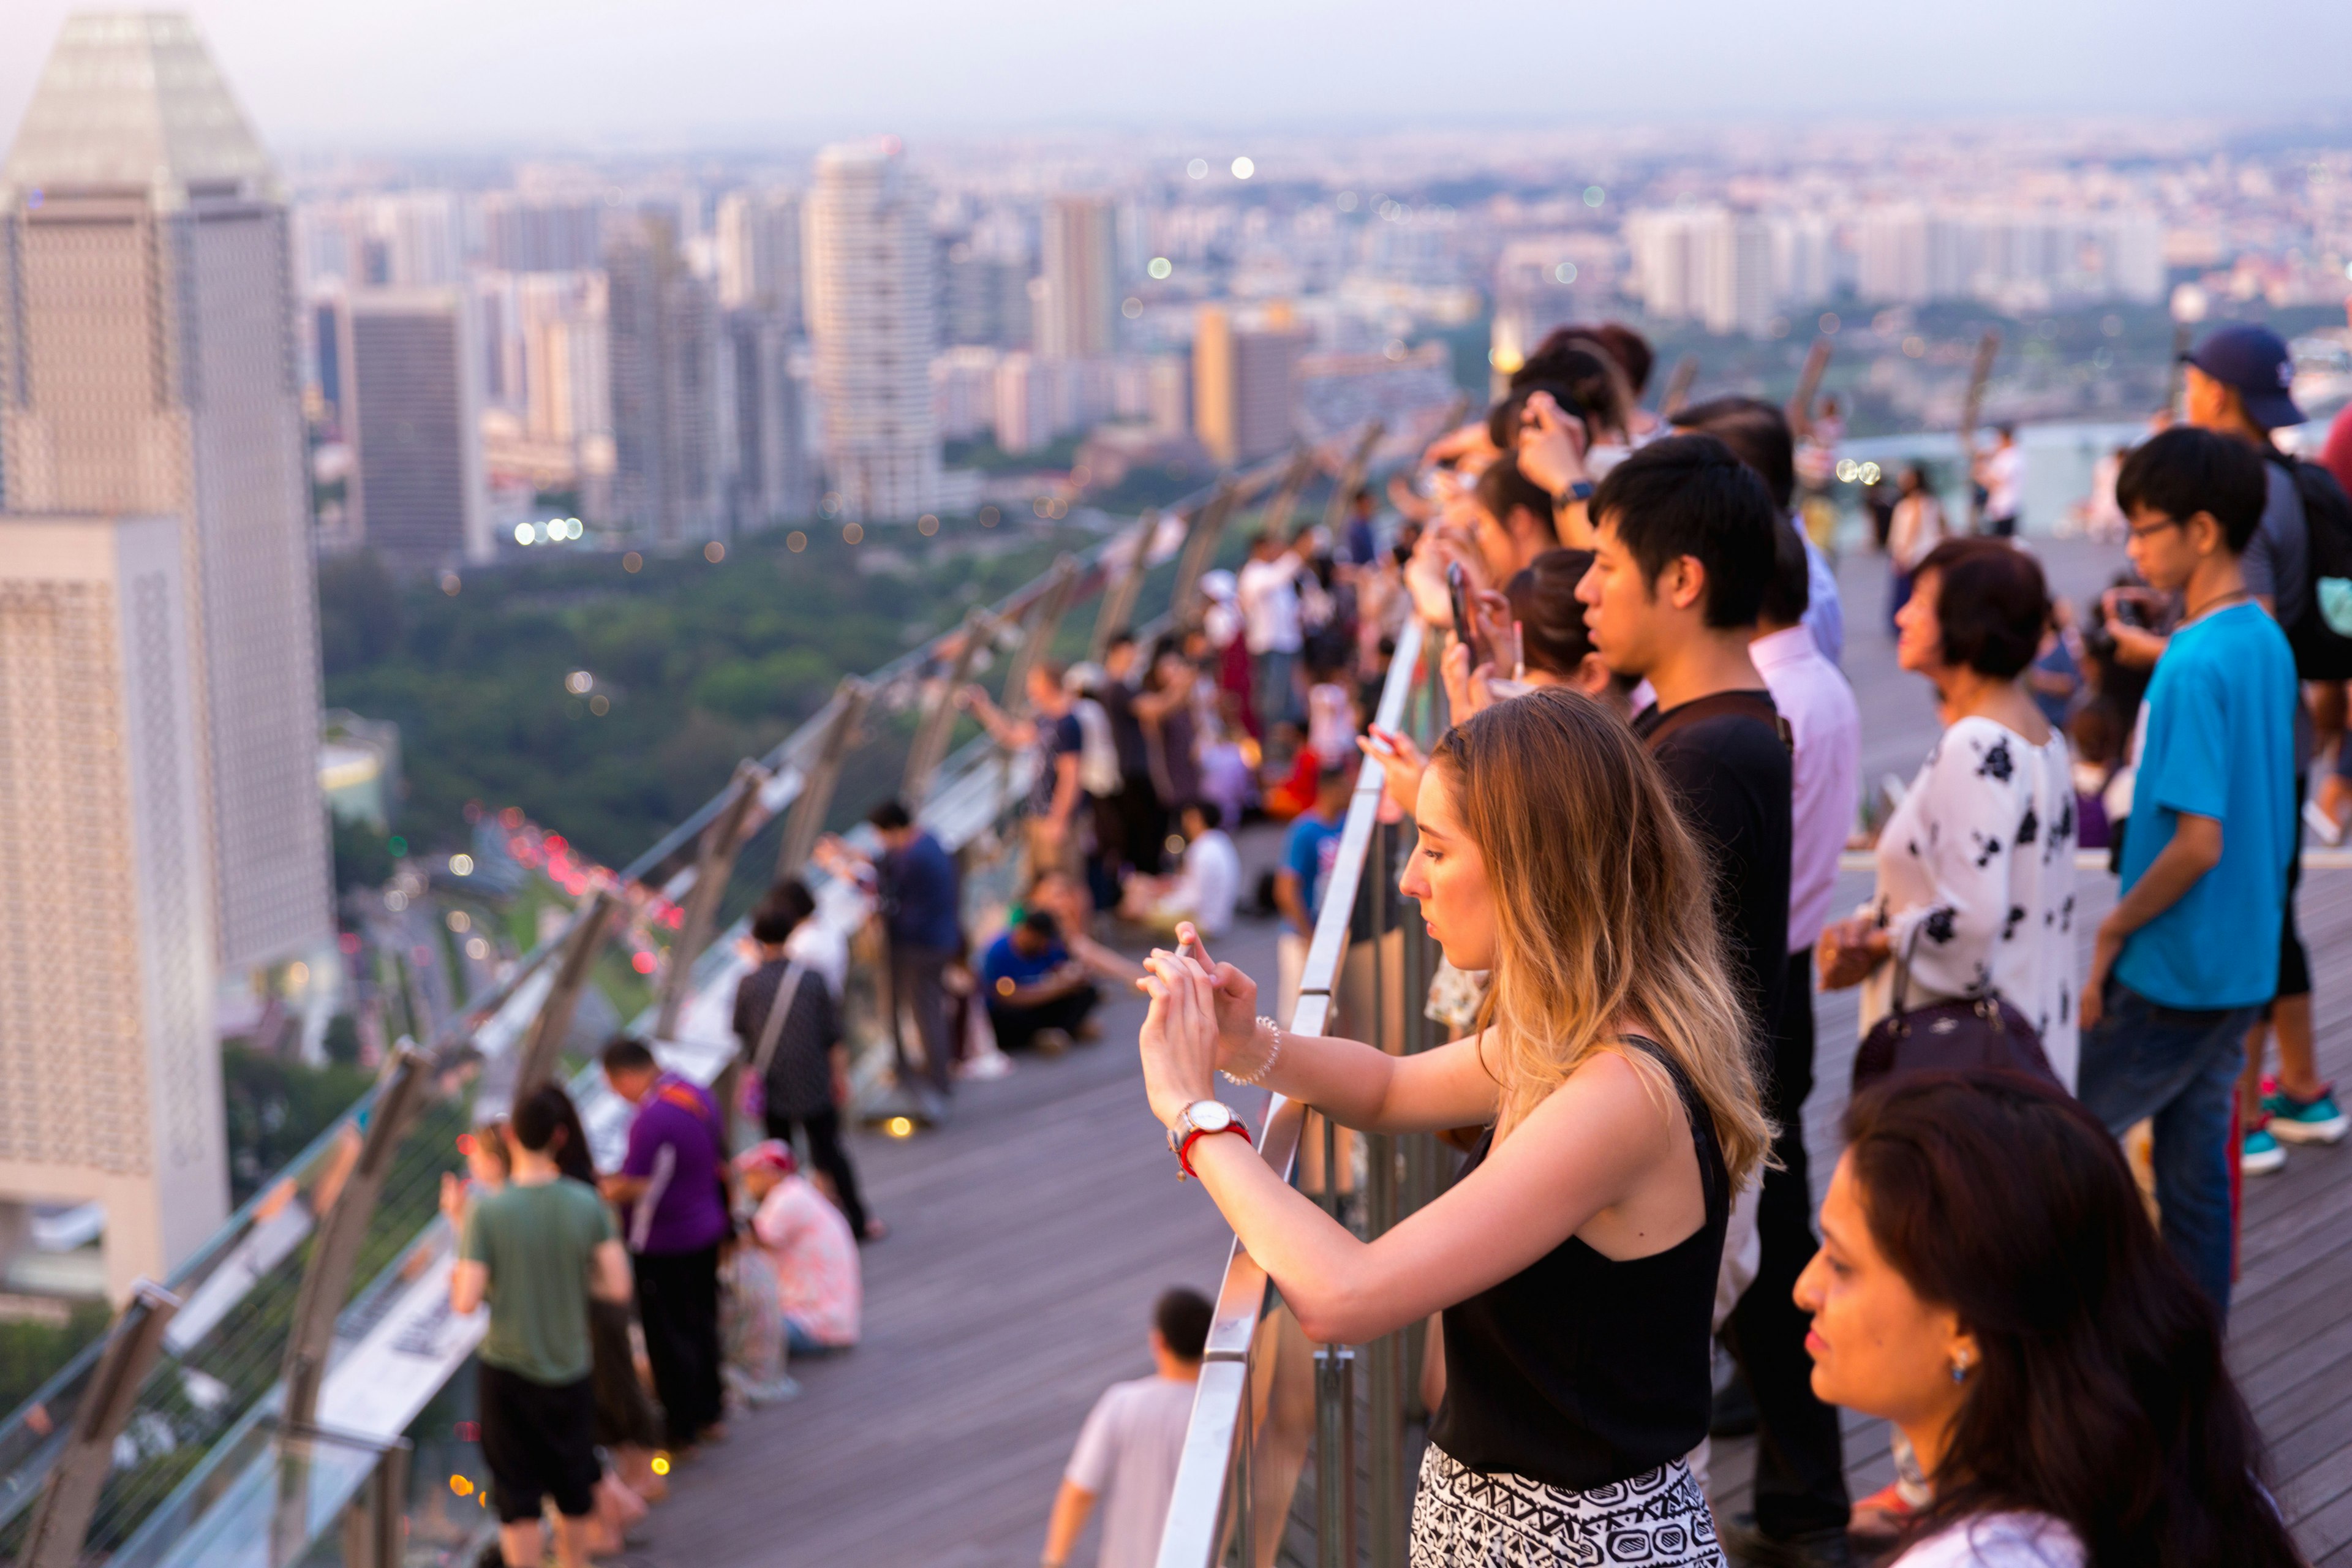 MAY 12, 2017: Visitors watching the sunset from the Observation Deck Skypark of Marina Bay Sands hotel.